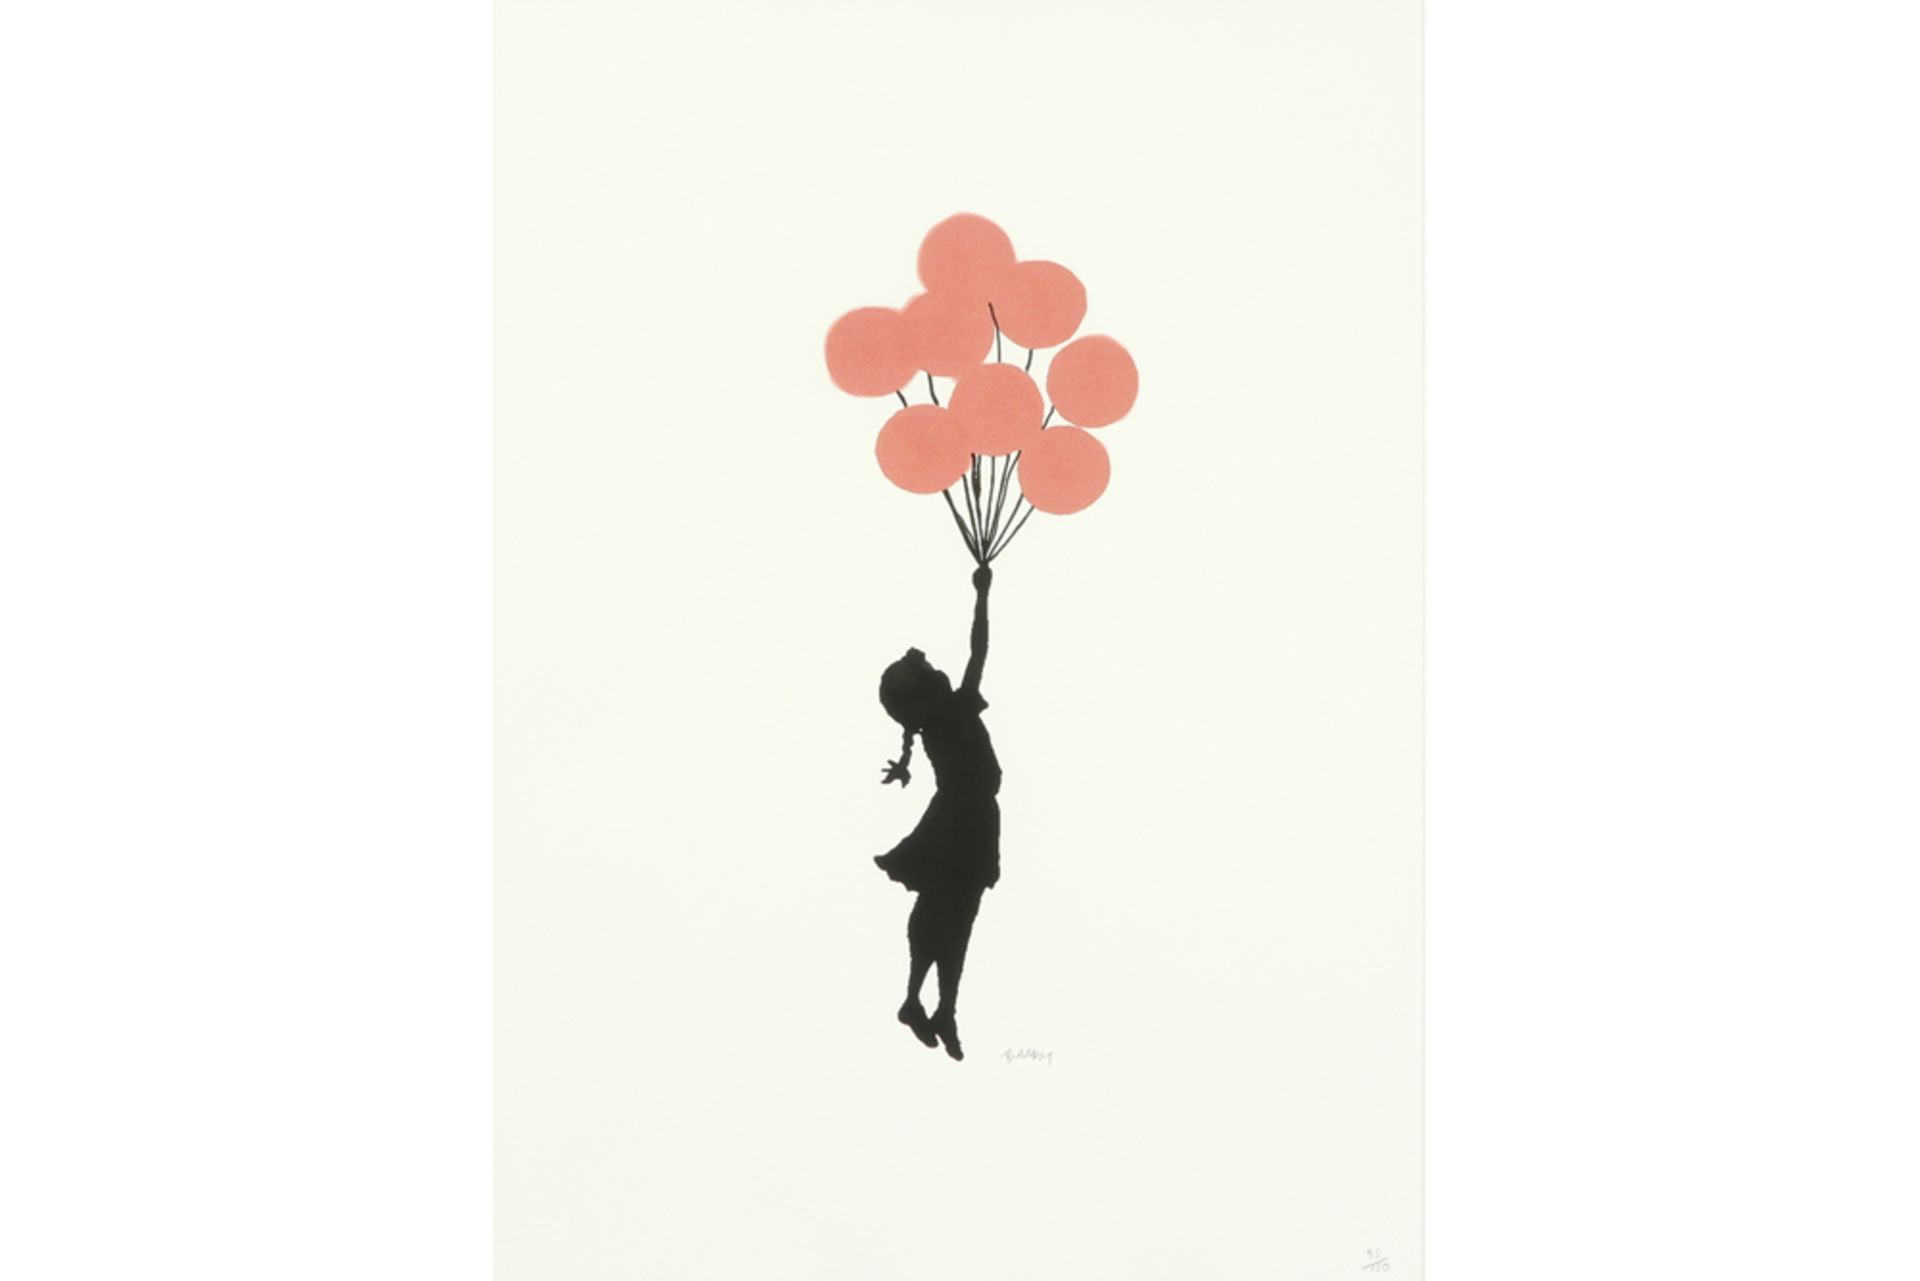 print after Banksy's "Girl with balloons" - with drystamp "P.O.W. Printmaking" || BANKSY (°